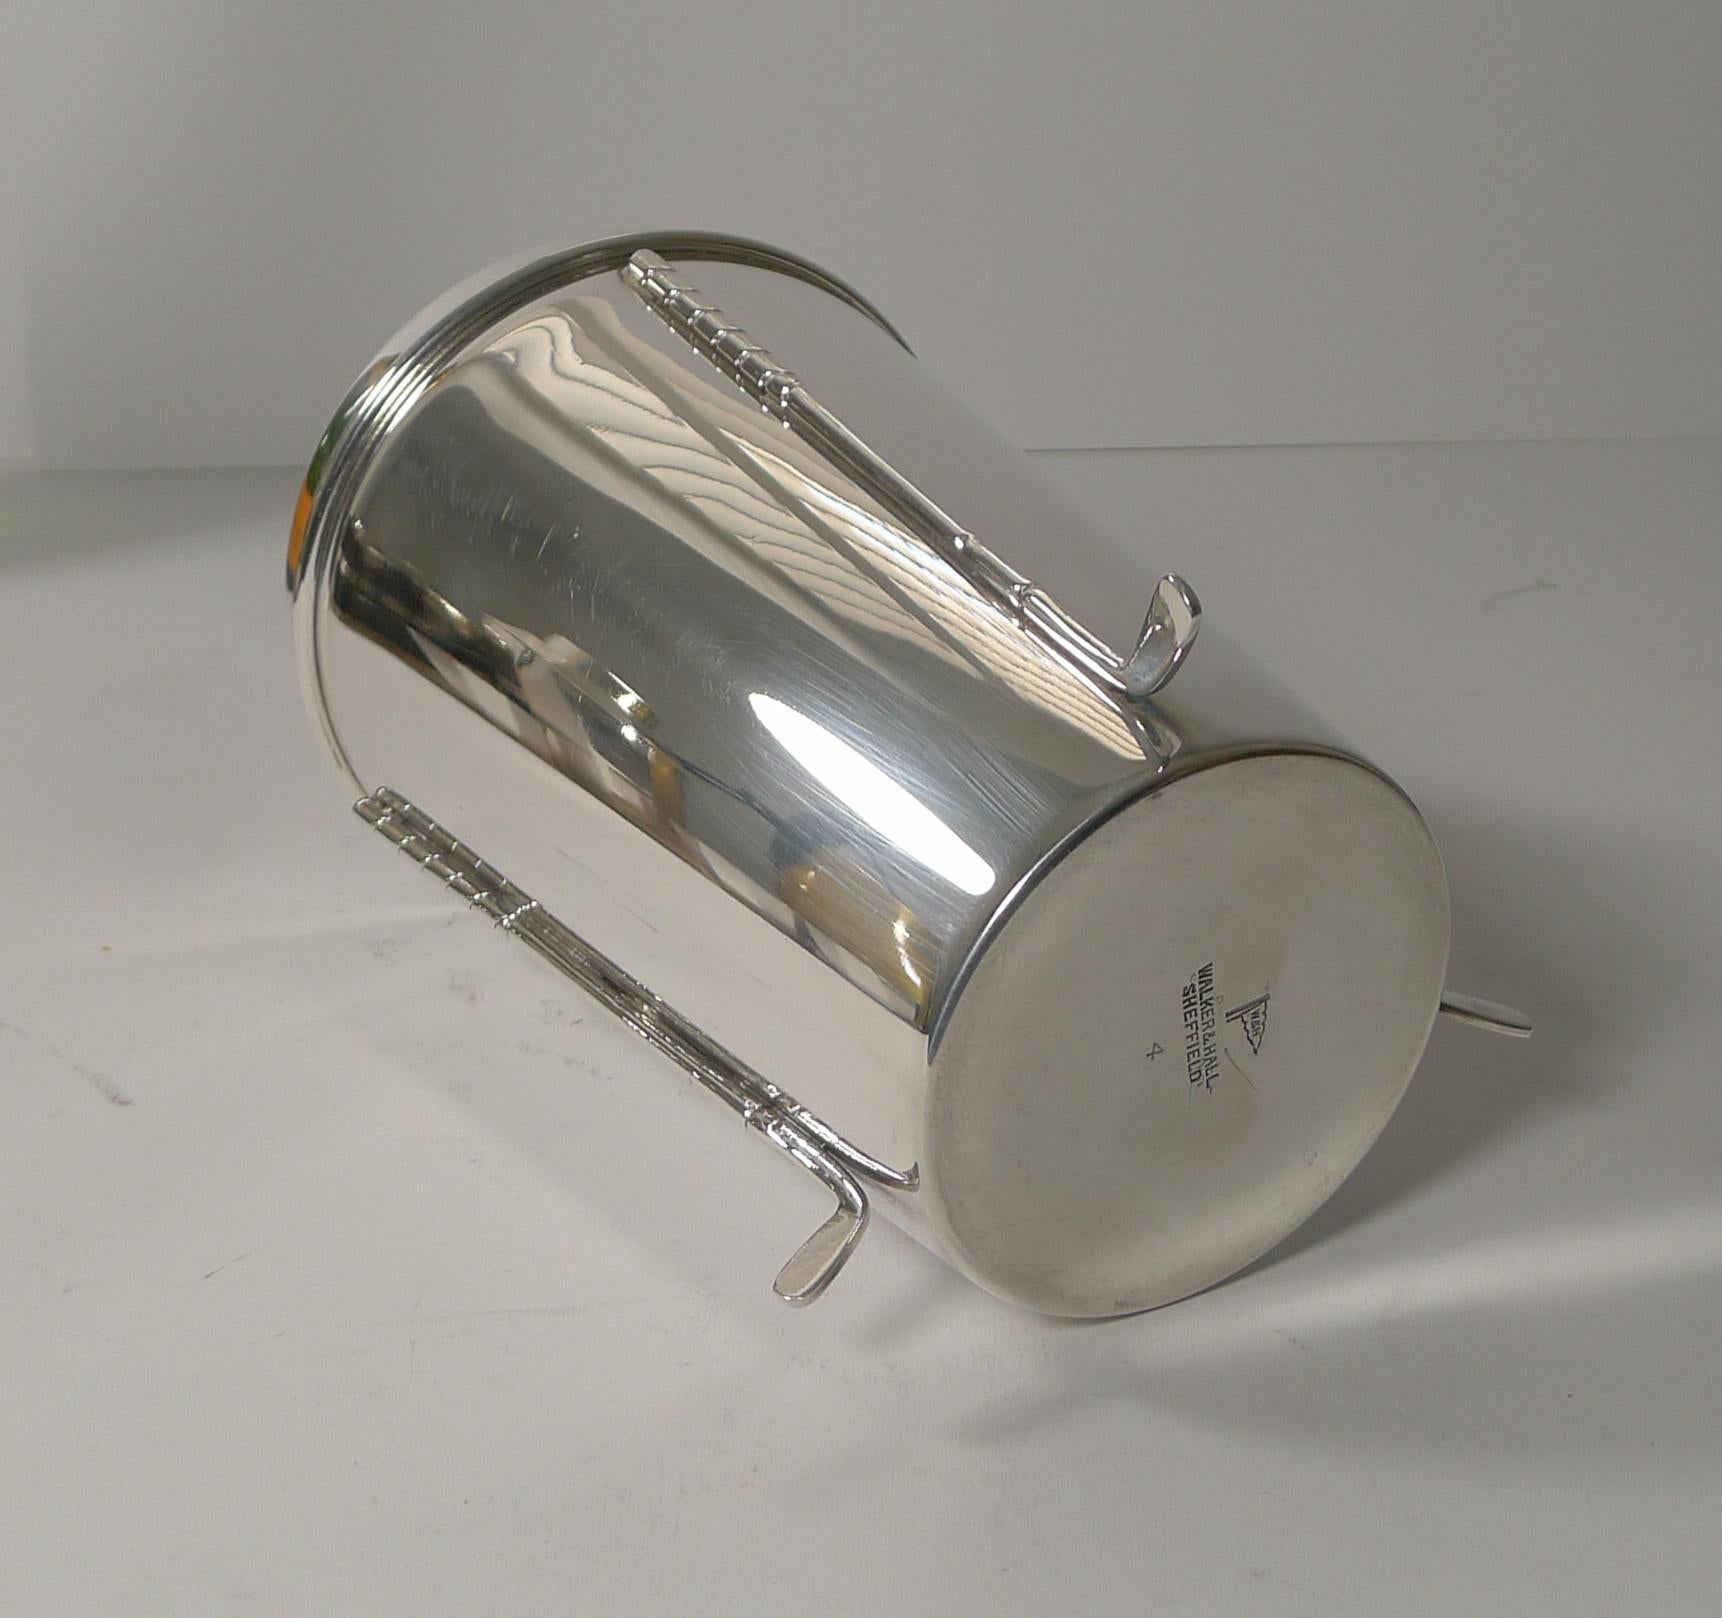 Mid-20th Century Rare Large English Golfing Cocktail Shaker by Walker & Hall c.1930